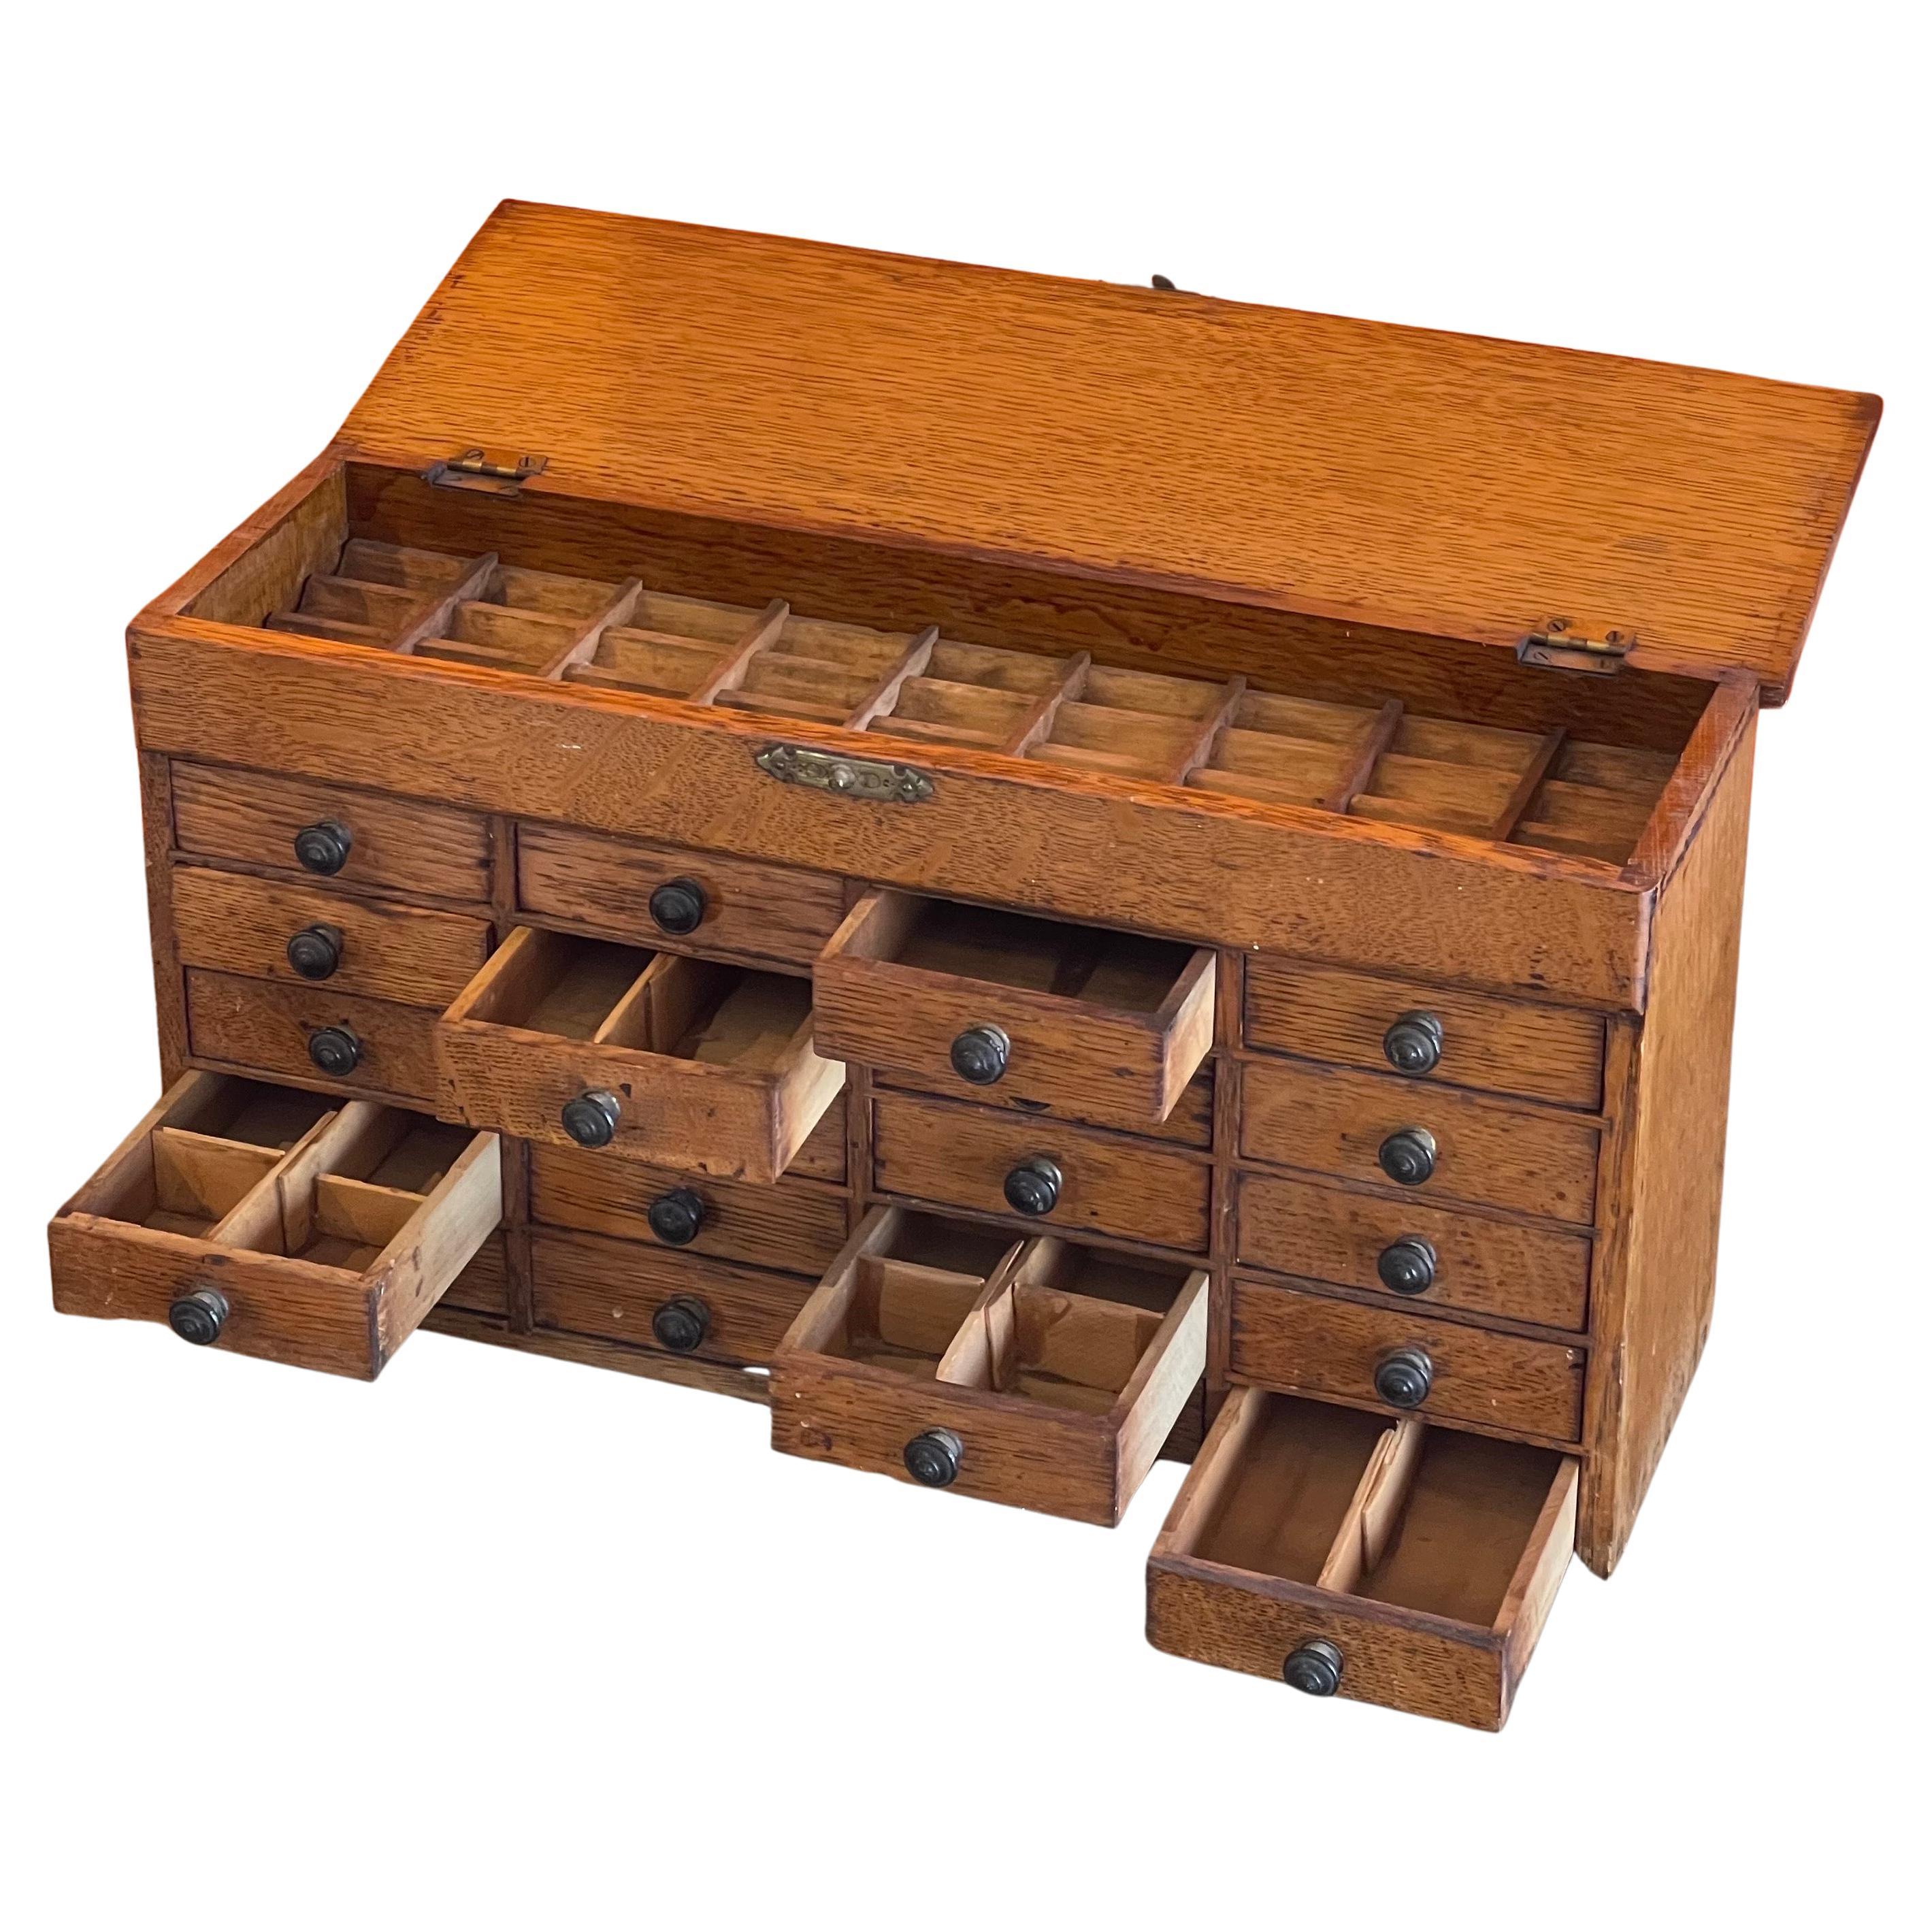 A very nice vintage twenty drawer oak watchmaker's chest / box / cabinet, circa 1950s. The piece is handmade out of oak and in good vintage condition; it is finished on all sides with brass hardware pulls and latch.  There are 20 small drawers with